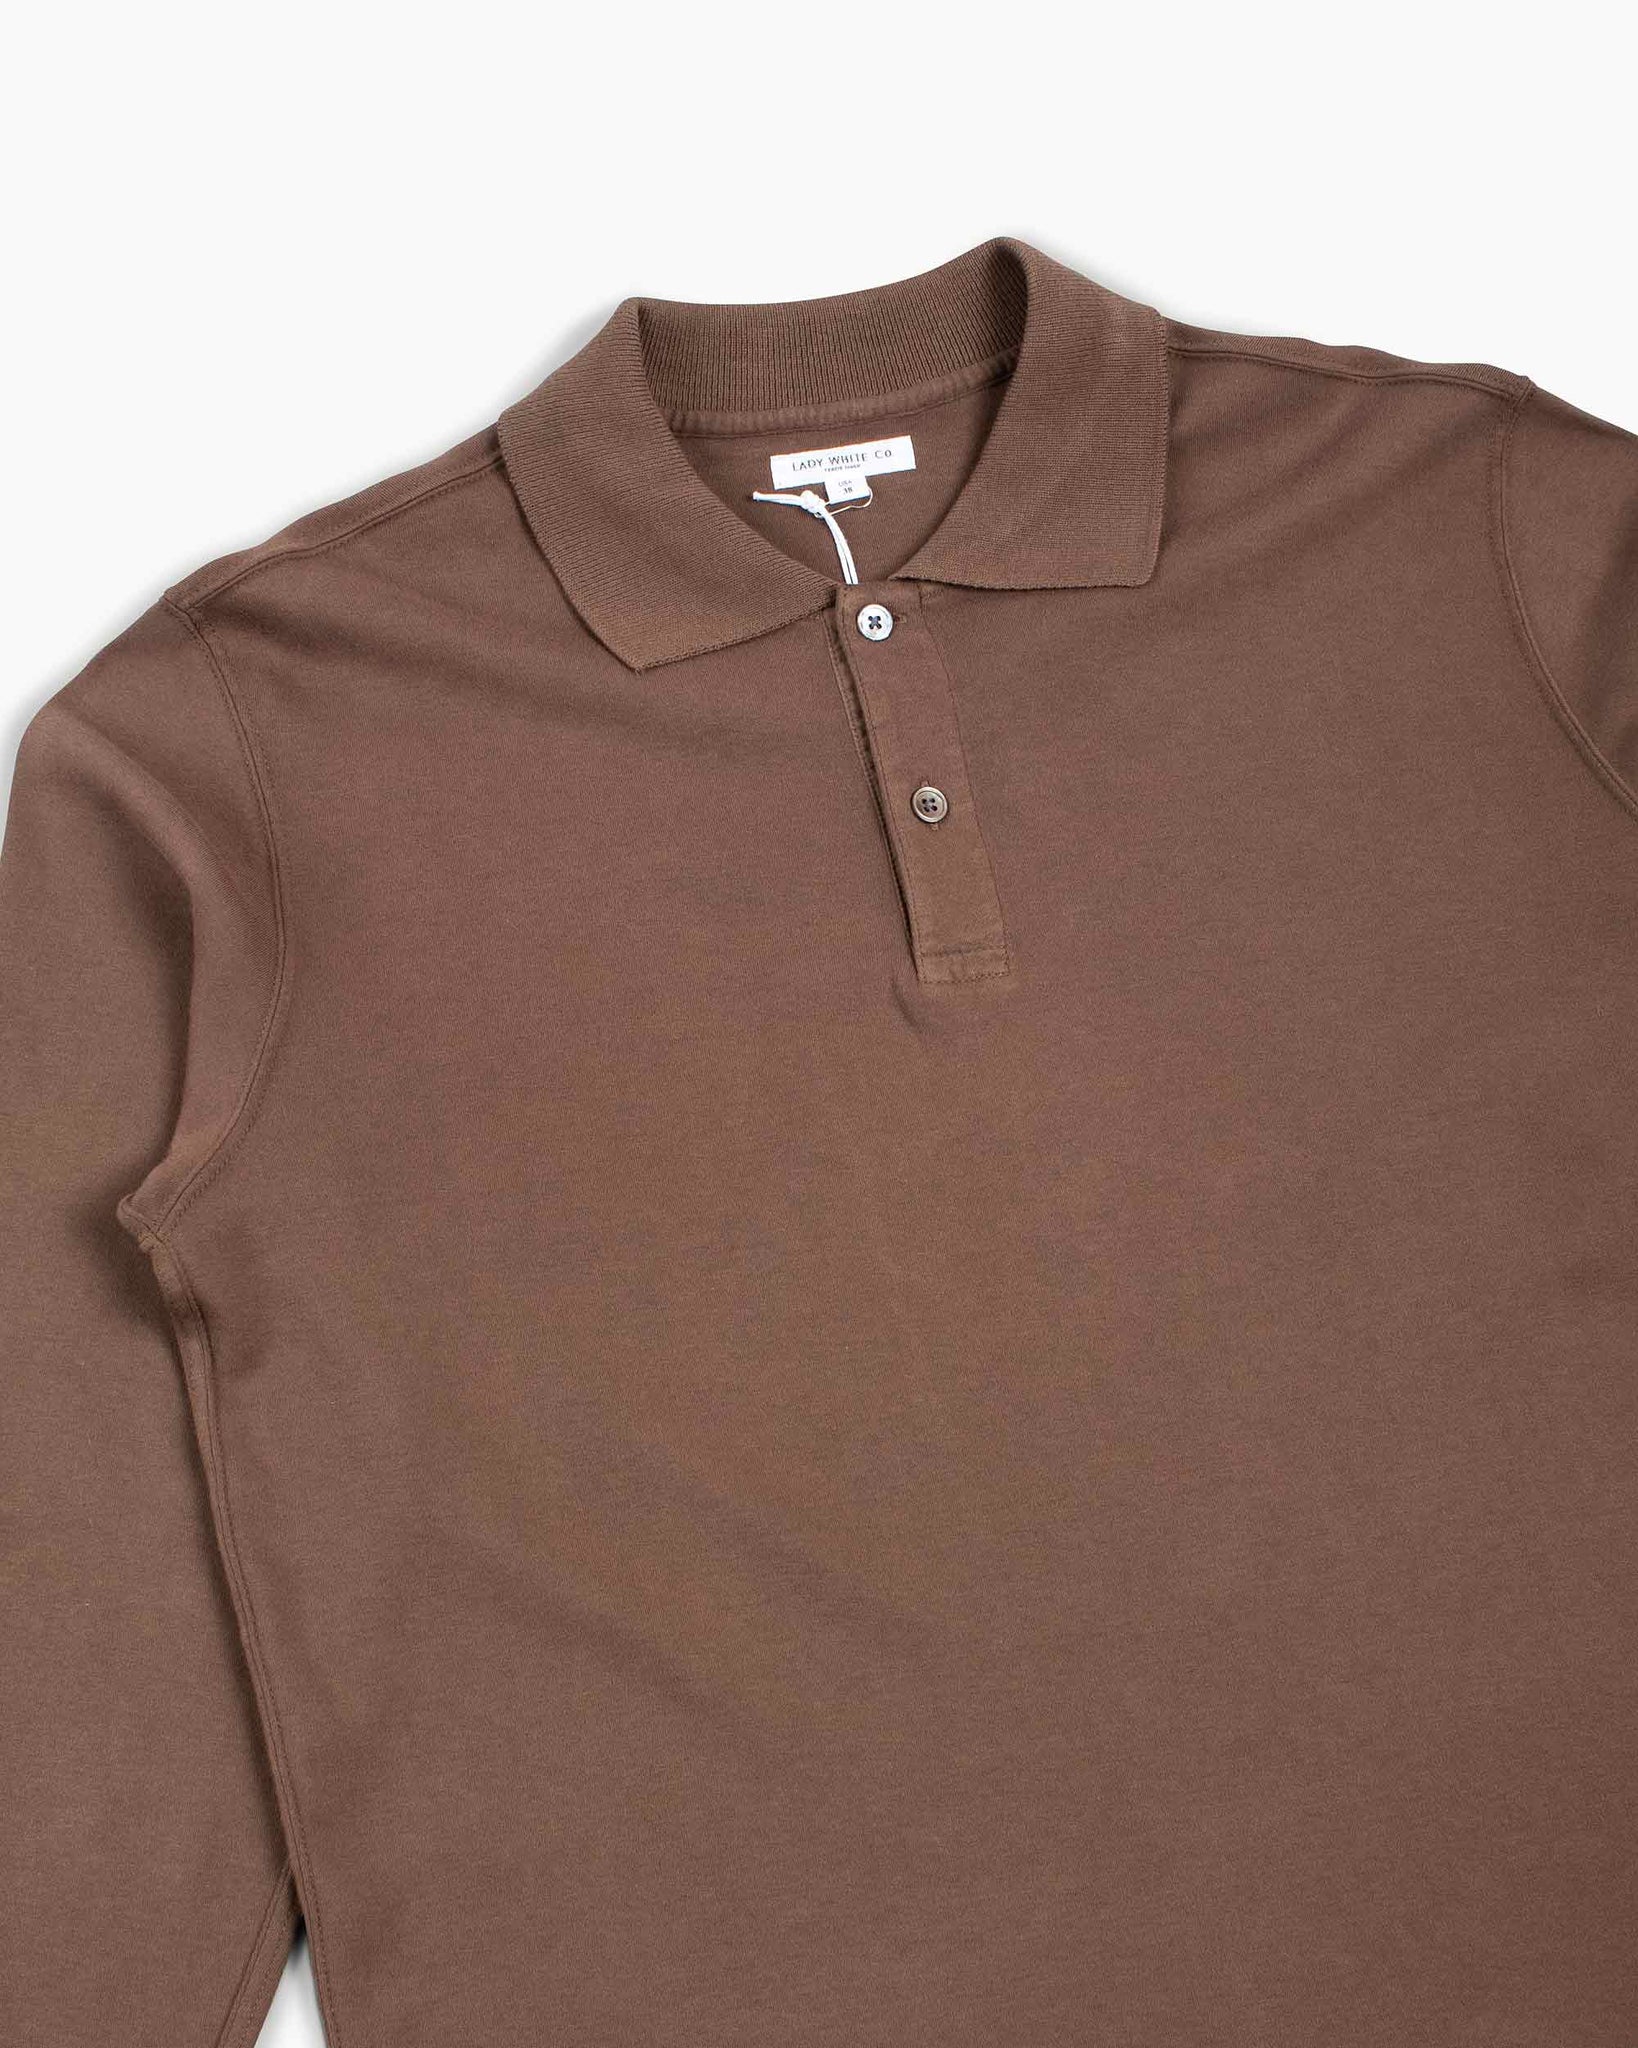 Lady White Co. Two Button Polo Dark Taupe Details